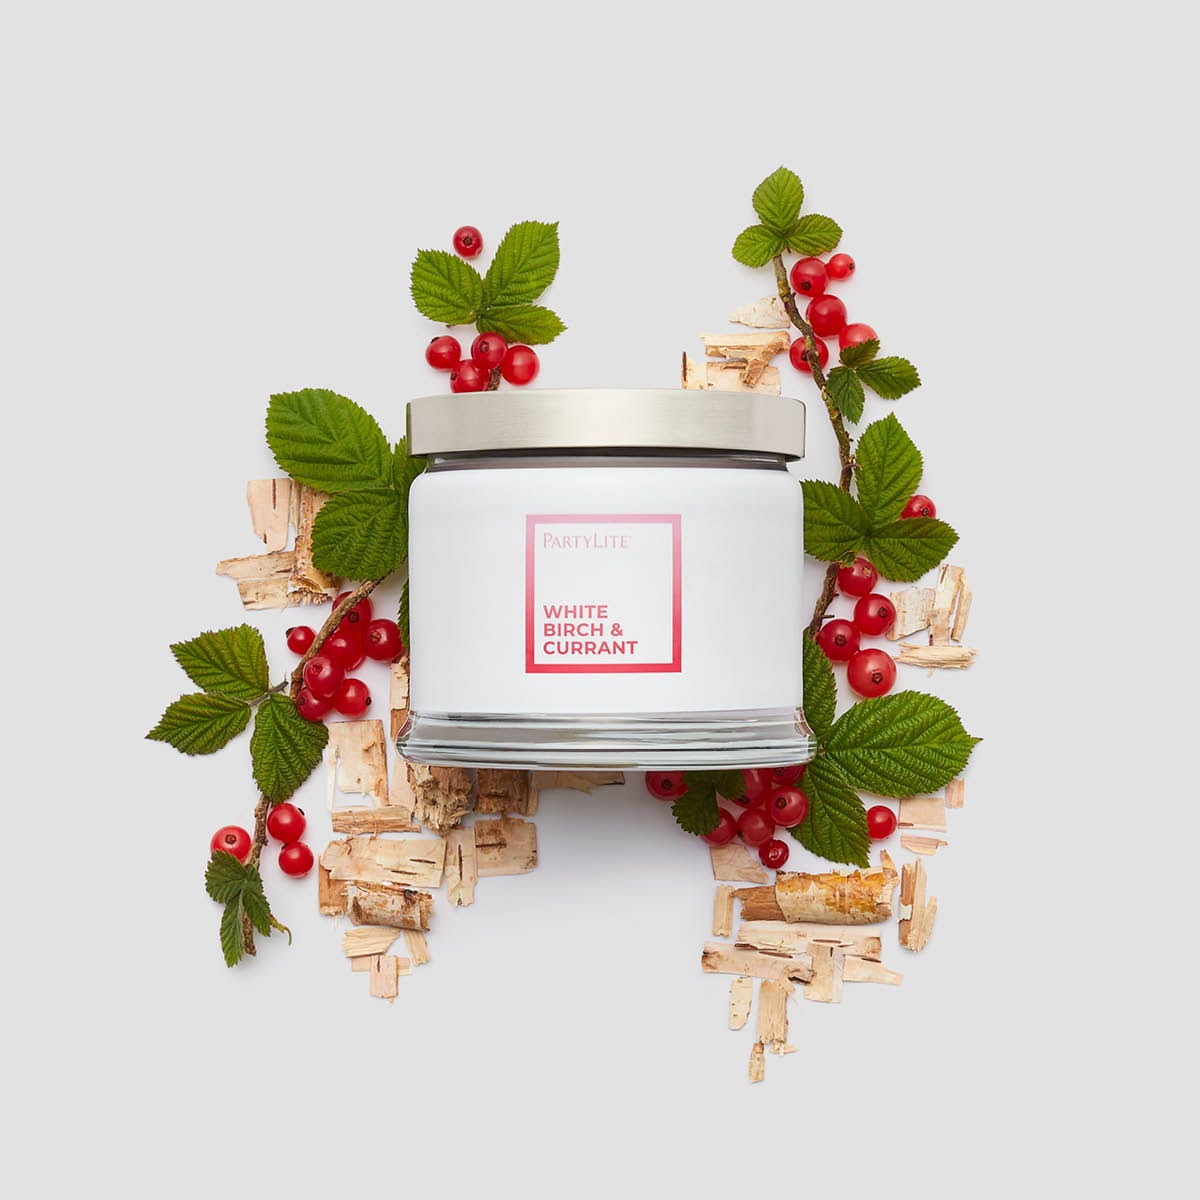 White Birch & Currant 3-Wick Jar Candle - PartyLite US